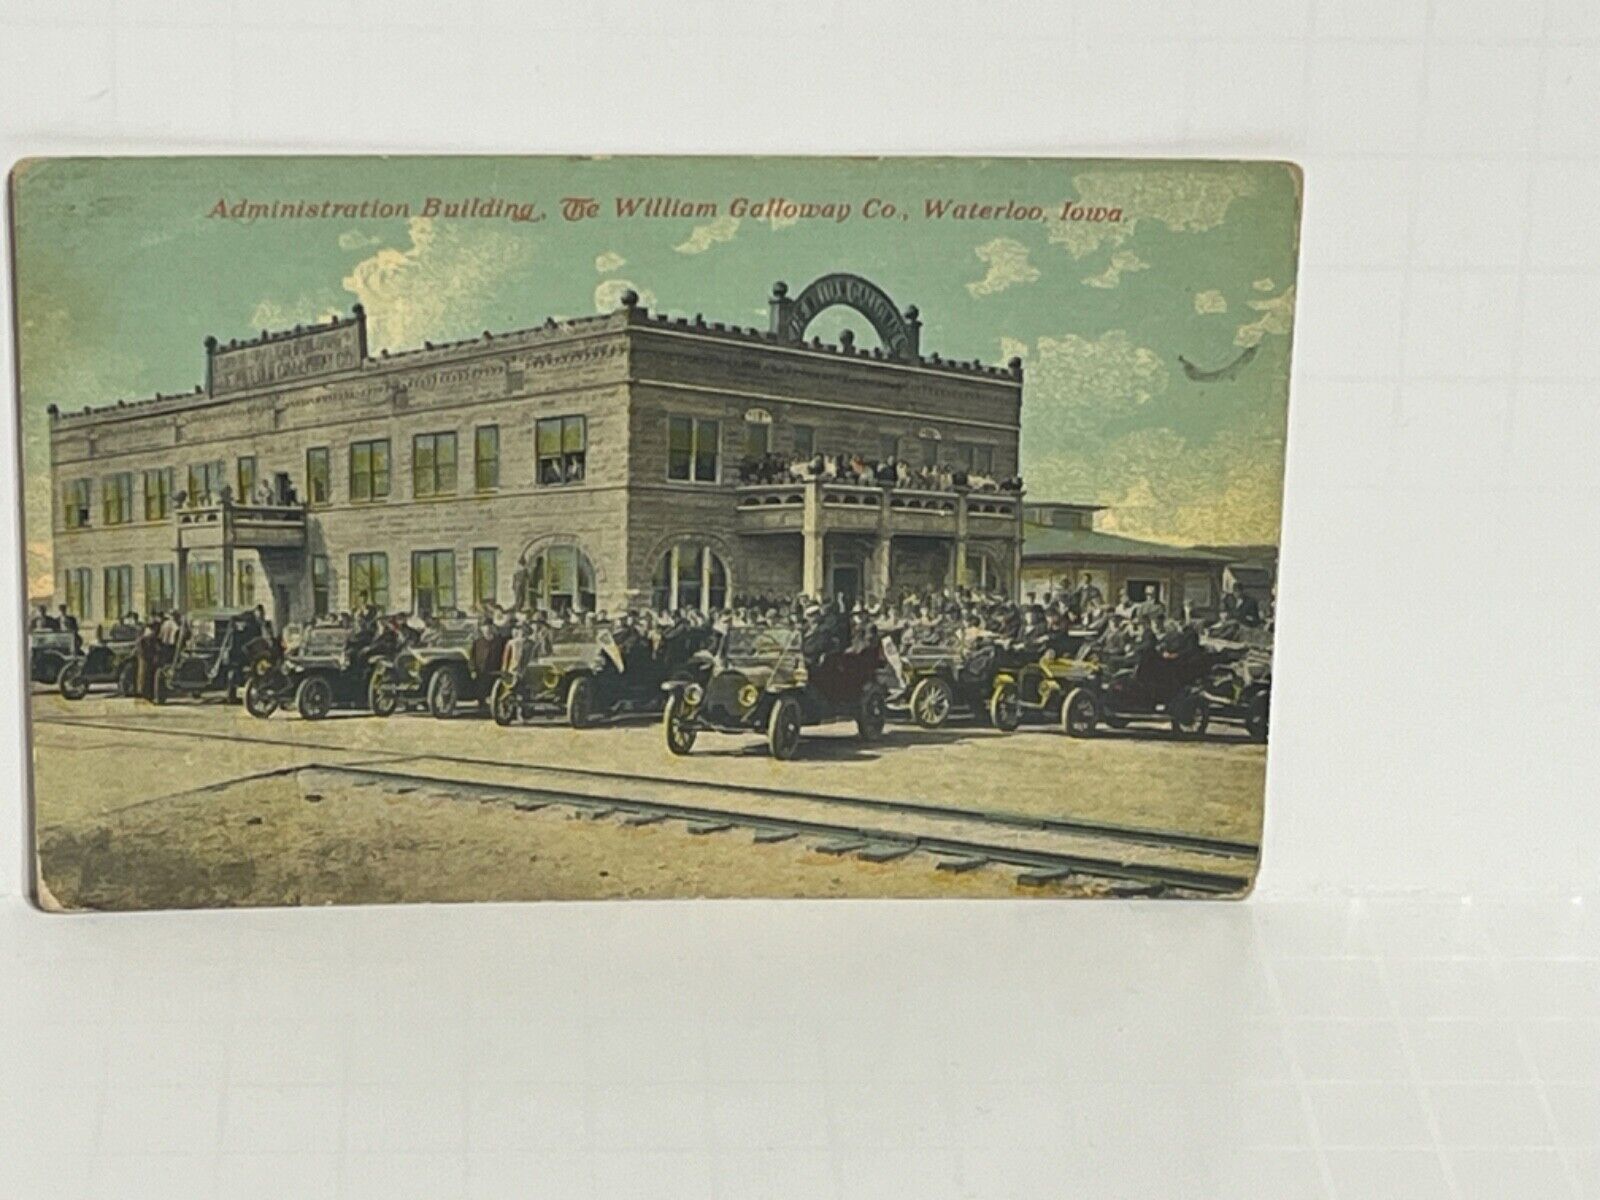 Administration Building The William Galloway Co Waterloo Iowa Postcard A45